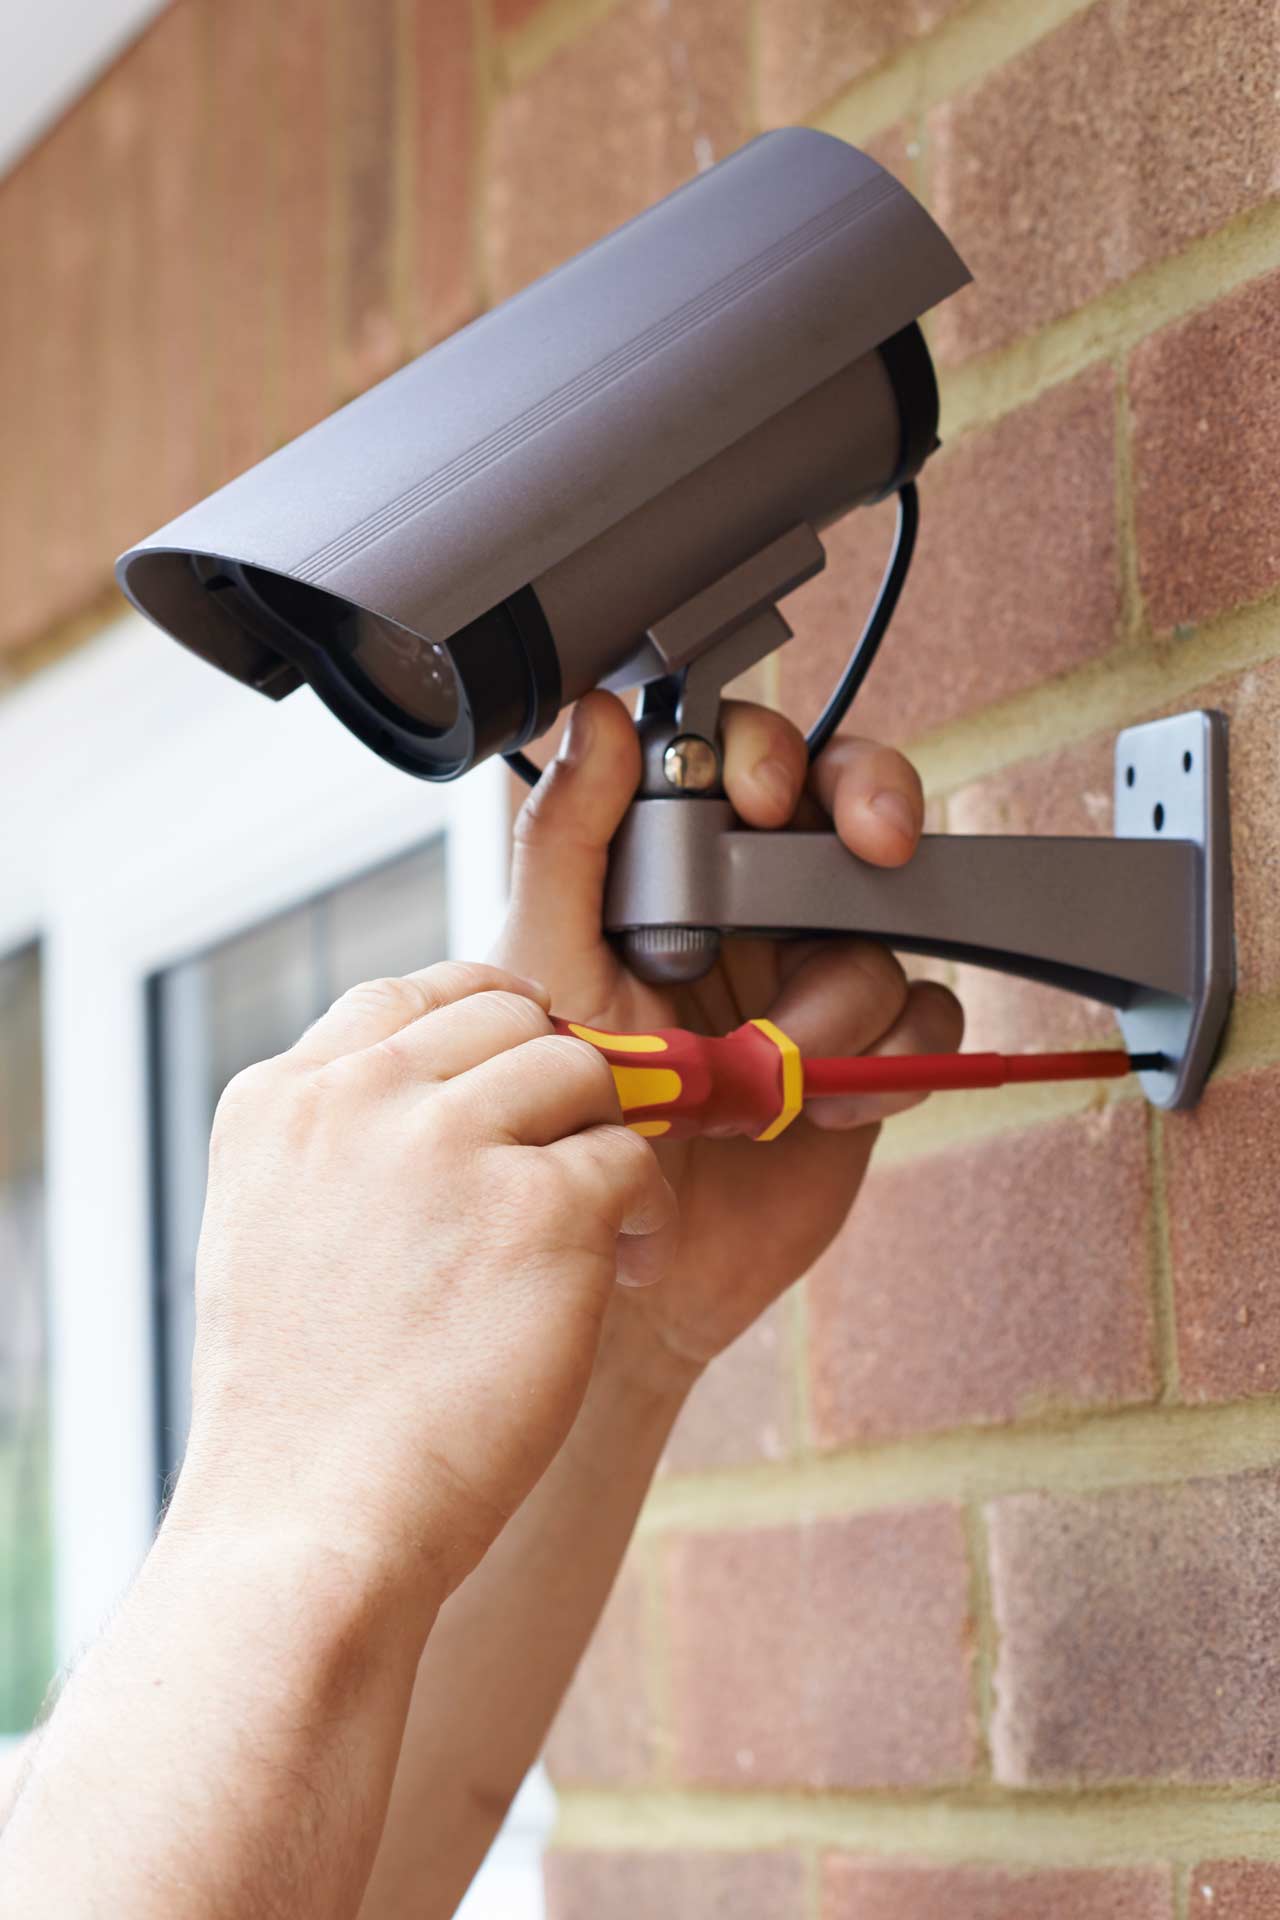 A security business technician installs a security camera outside